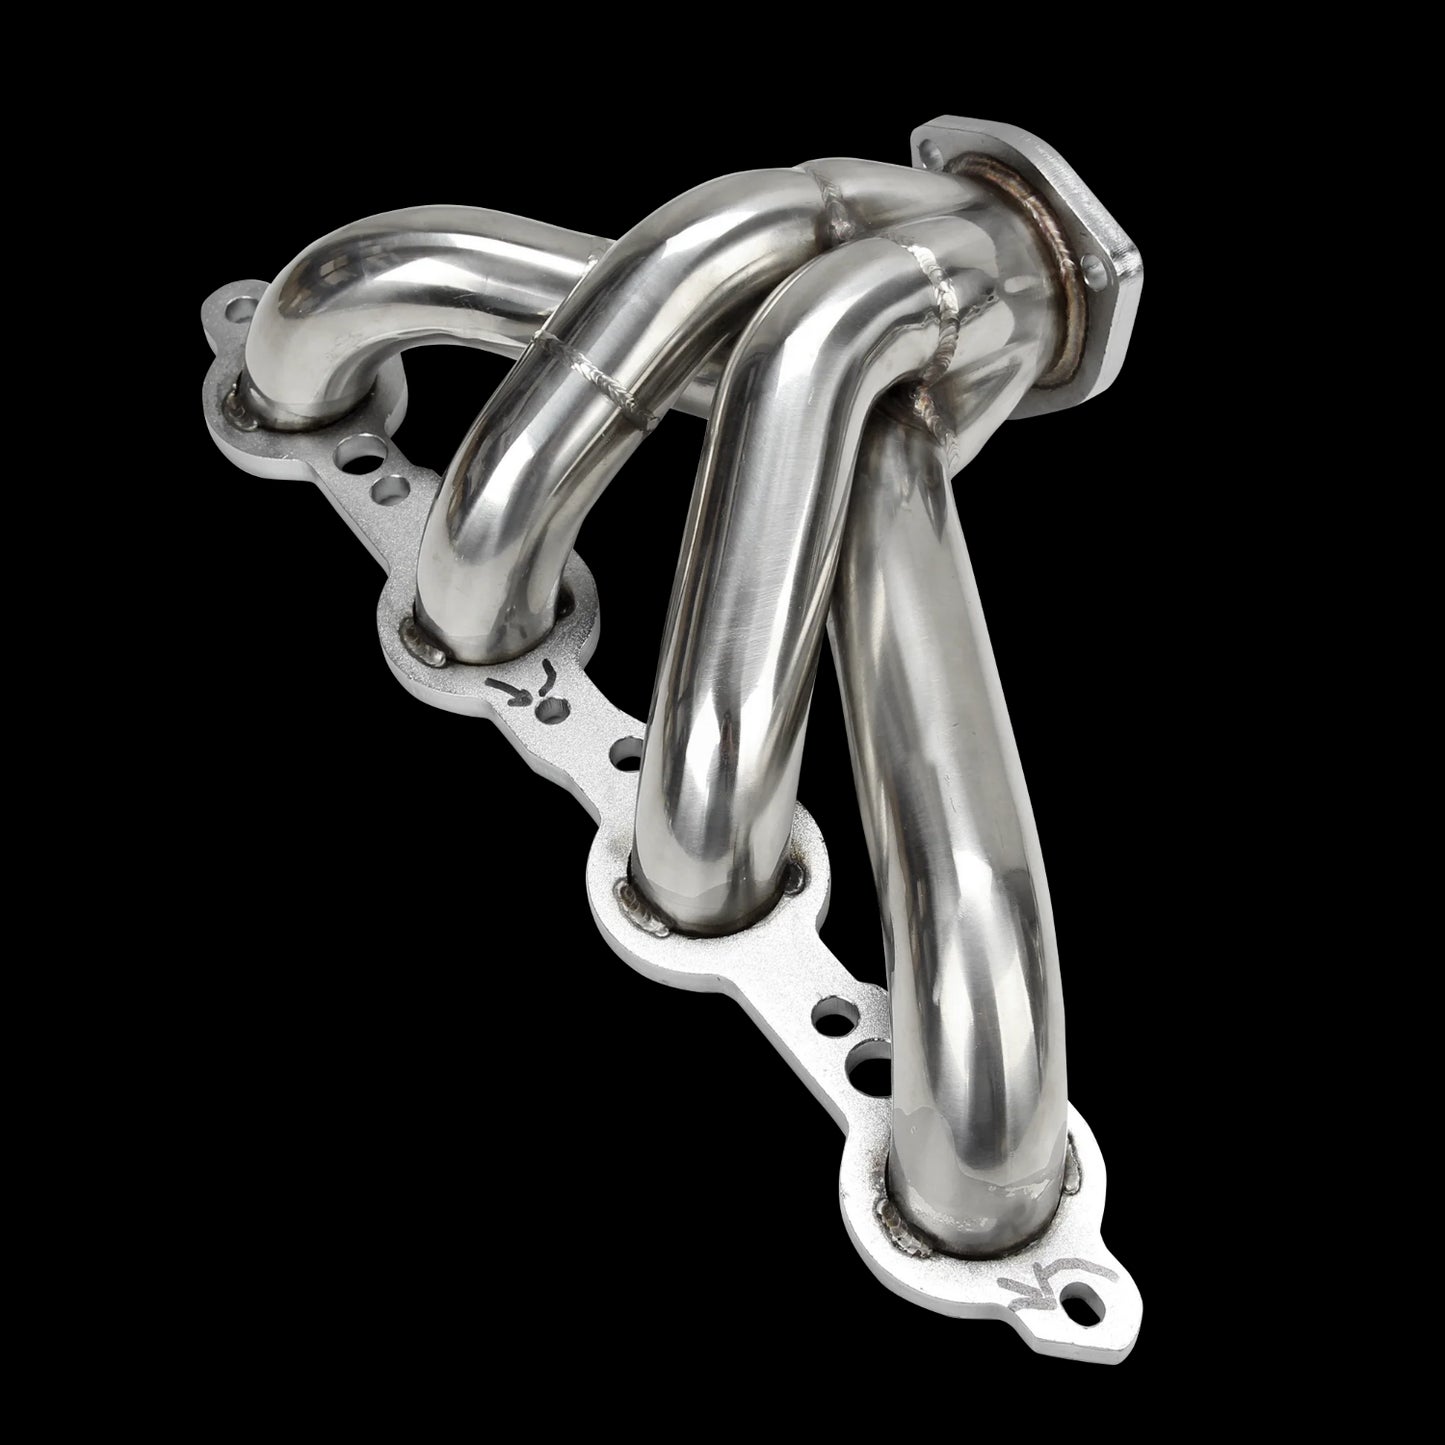 Exhaust Manifold Headers for Small Block Chevy Ceramic Coated Polished Block Hugger GM LS1 LS6